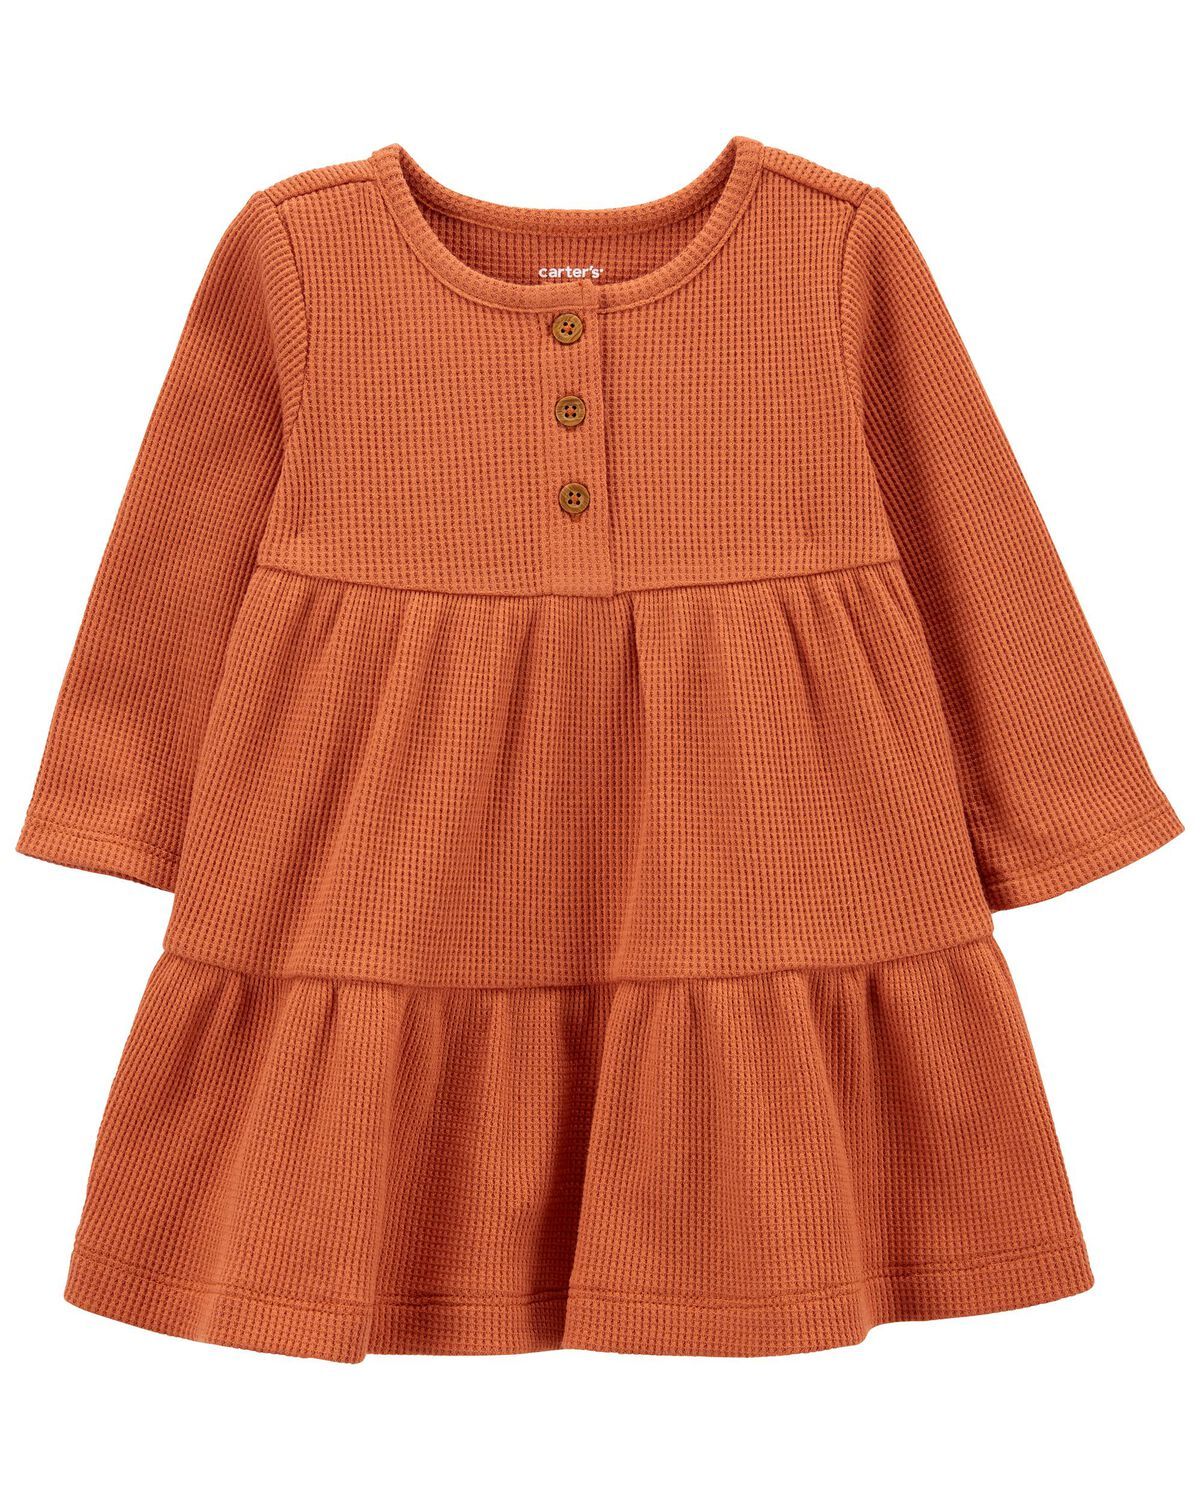 Orange Baby Long-Sleeve Tiered Thermal Dress | carters.com | Carter's